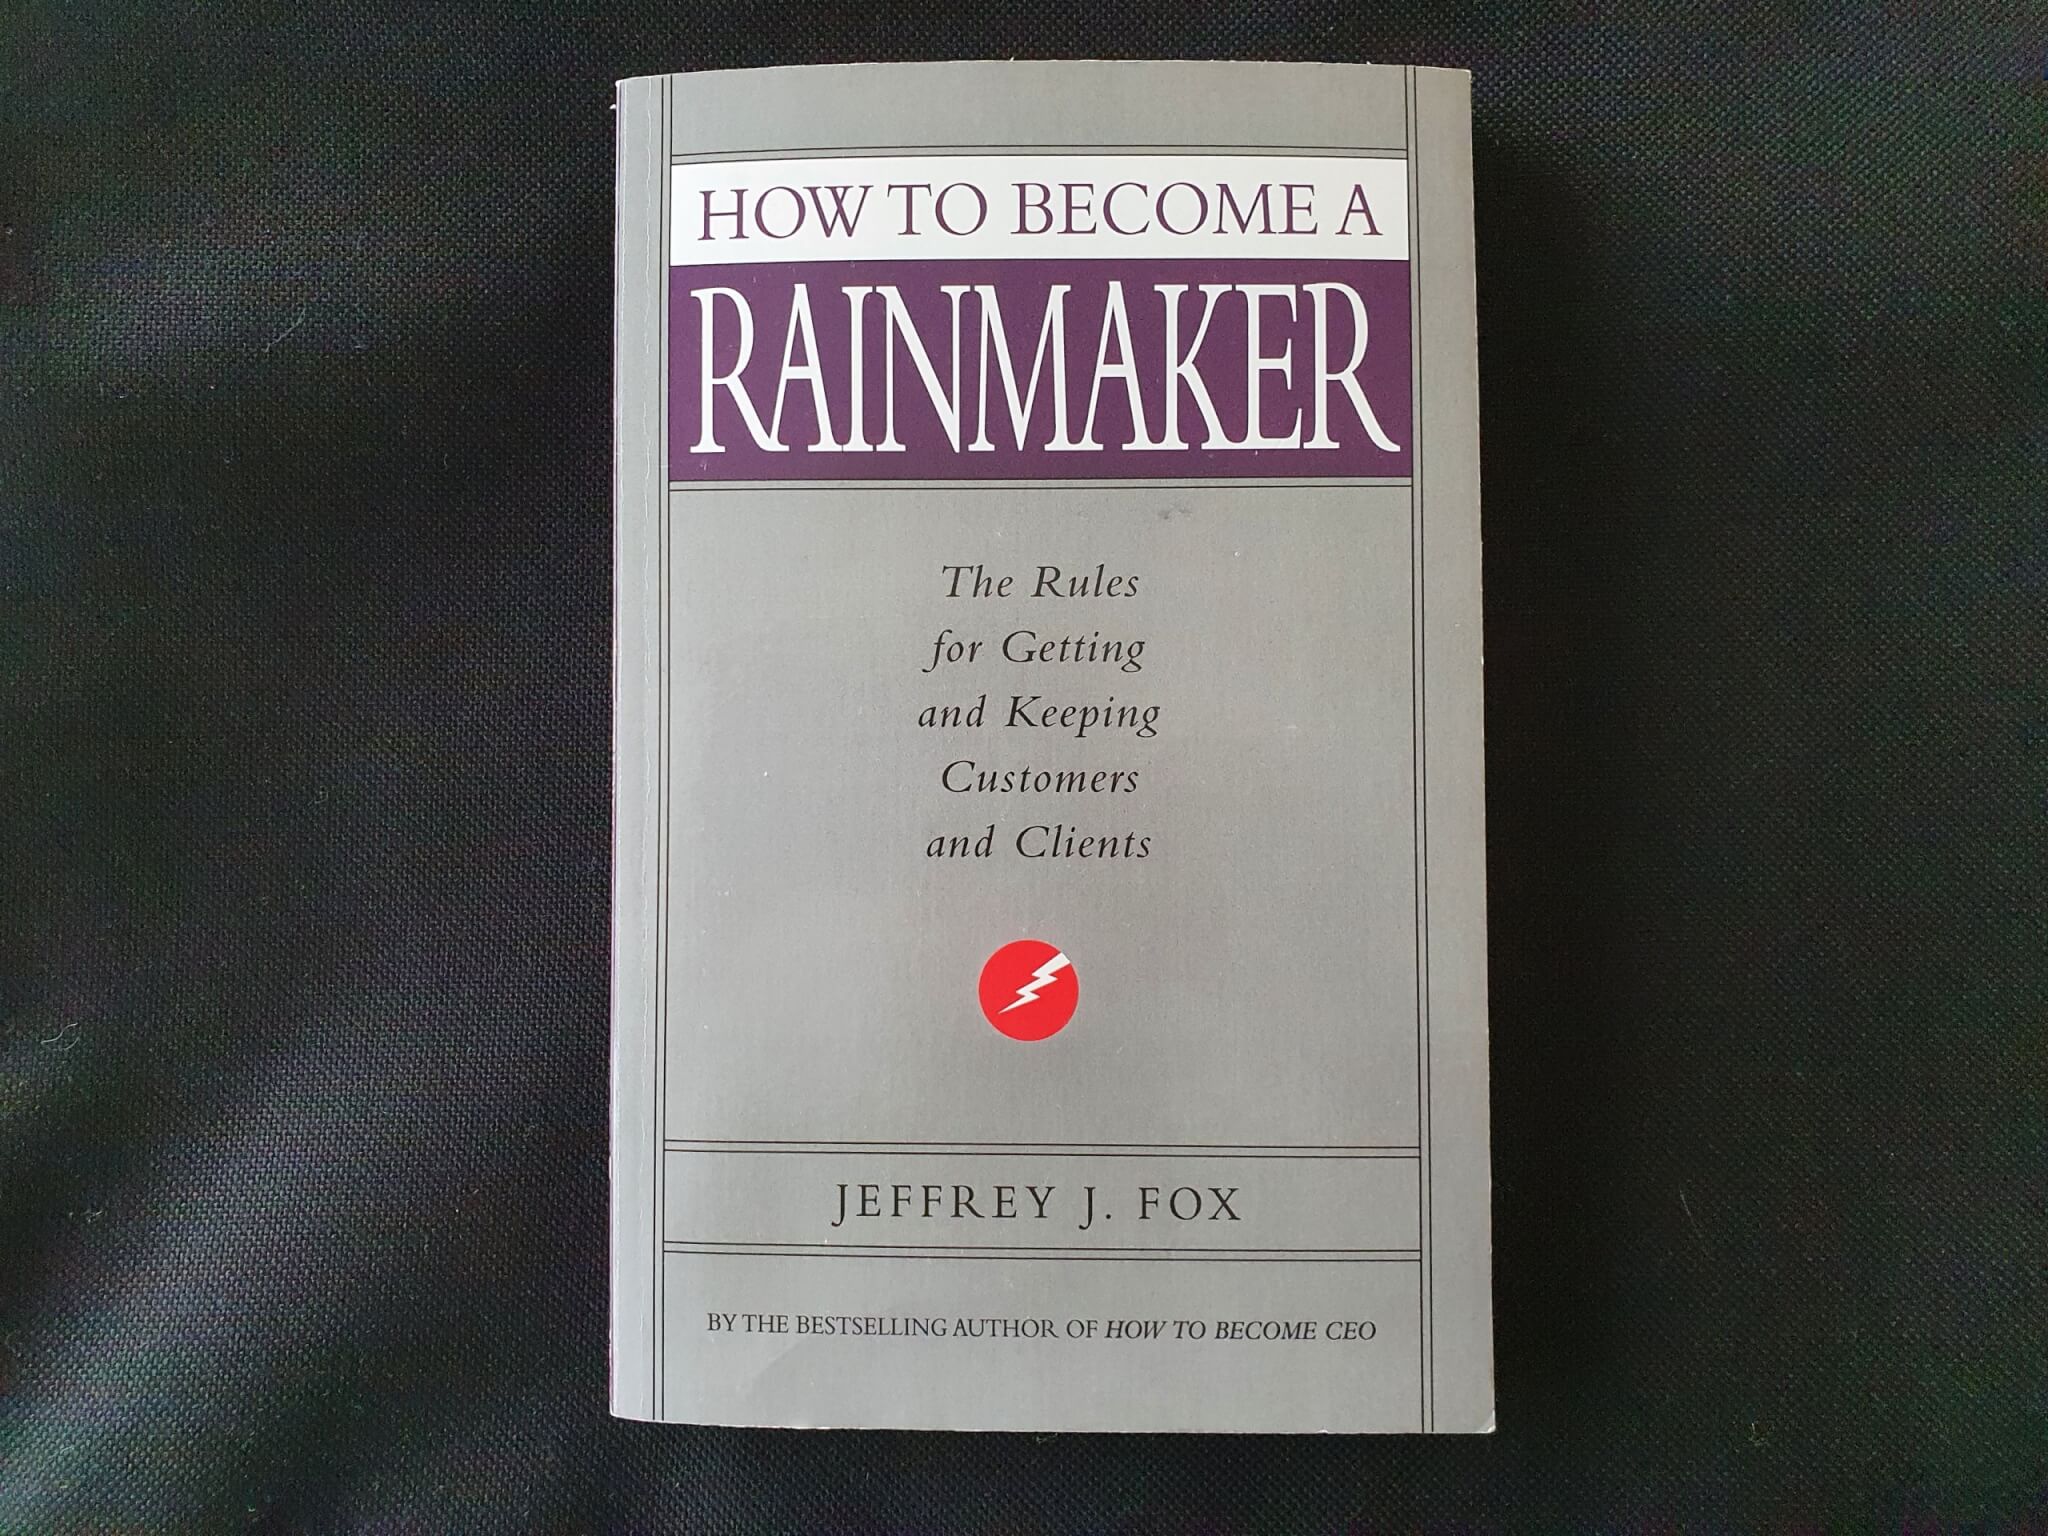 Magnify Consulting - How to Become a Rainmaker by Jeffrey J. Fox